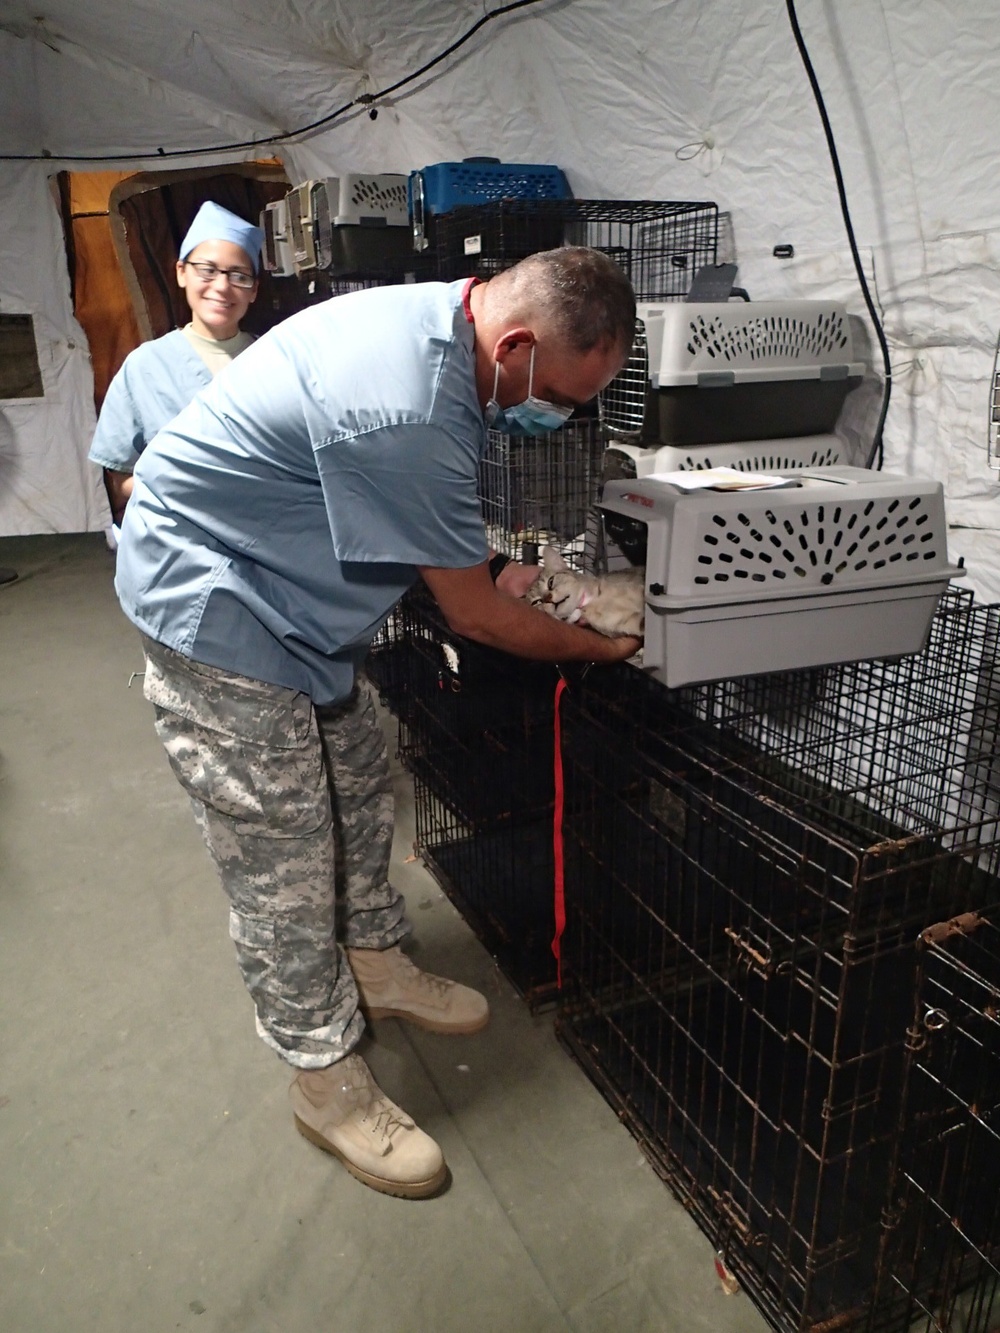 Service members provide veterinary care for patients during IRT mission at Norwich, NY